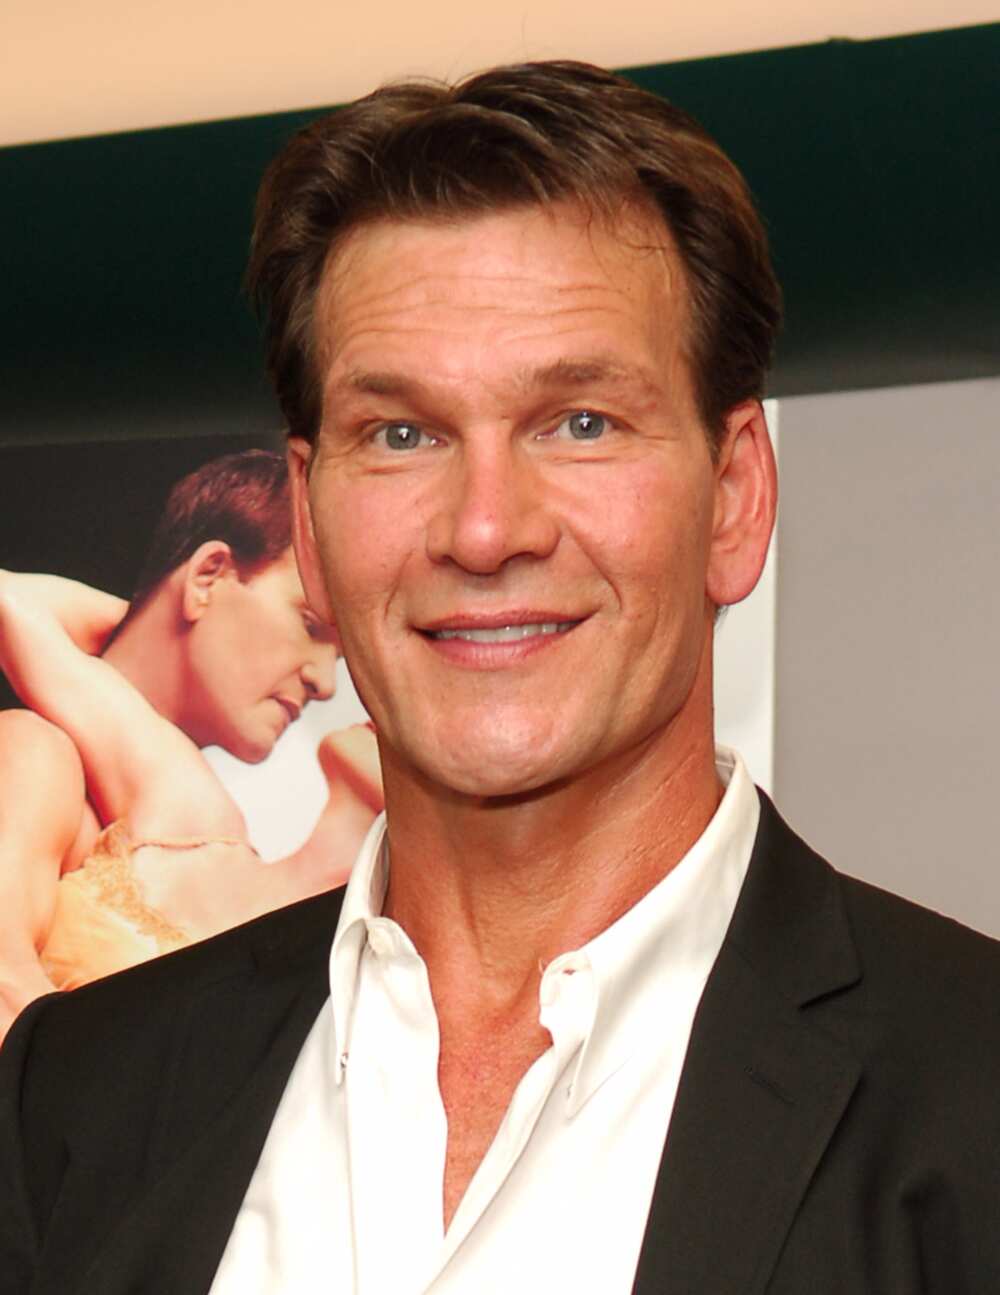 Who is Patrick Swayze's son?